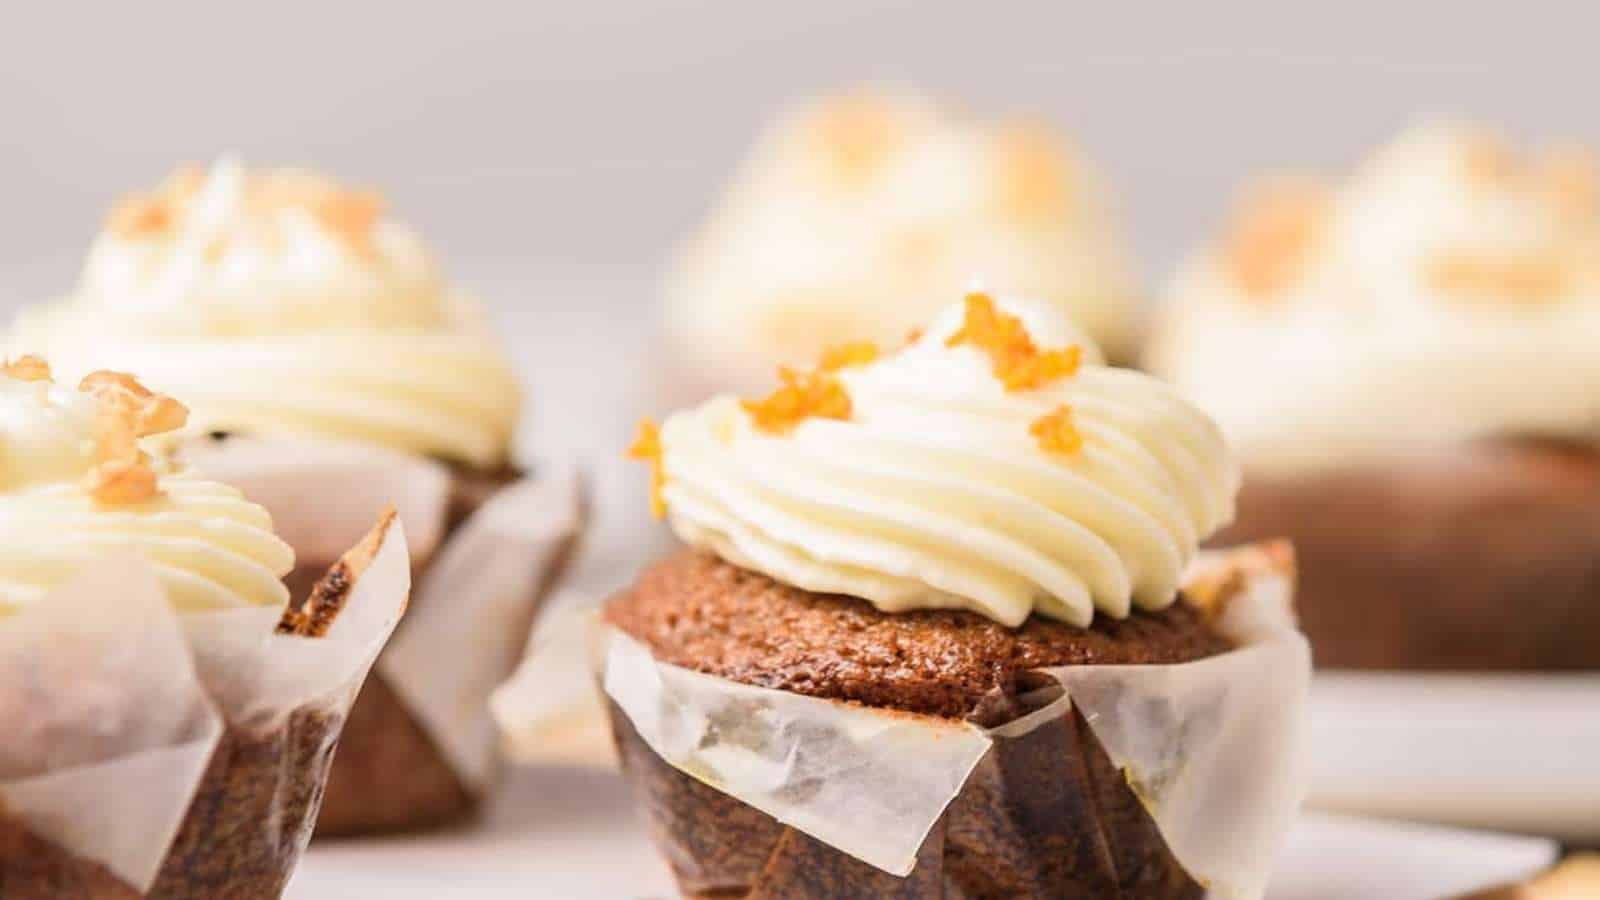 A group of cupcakes topped with frosting and orange zest.